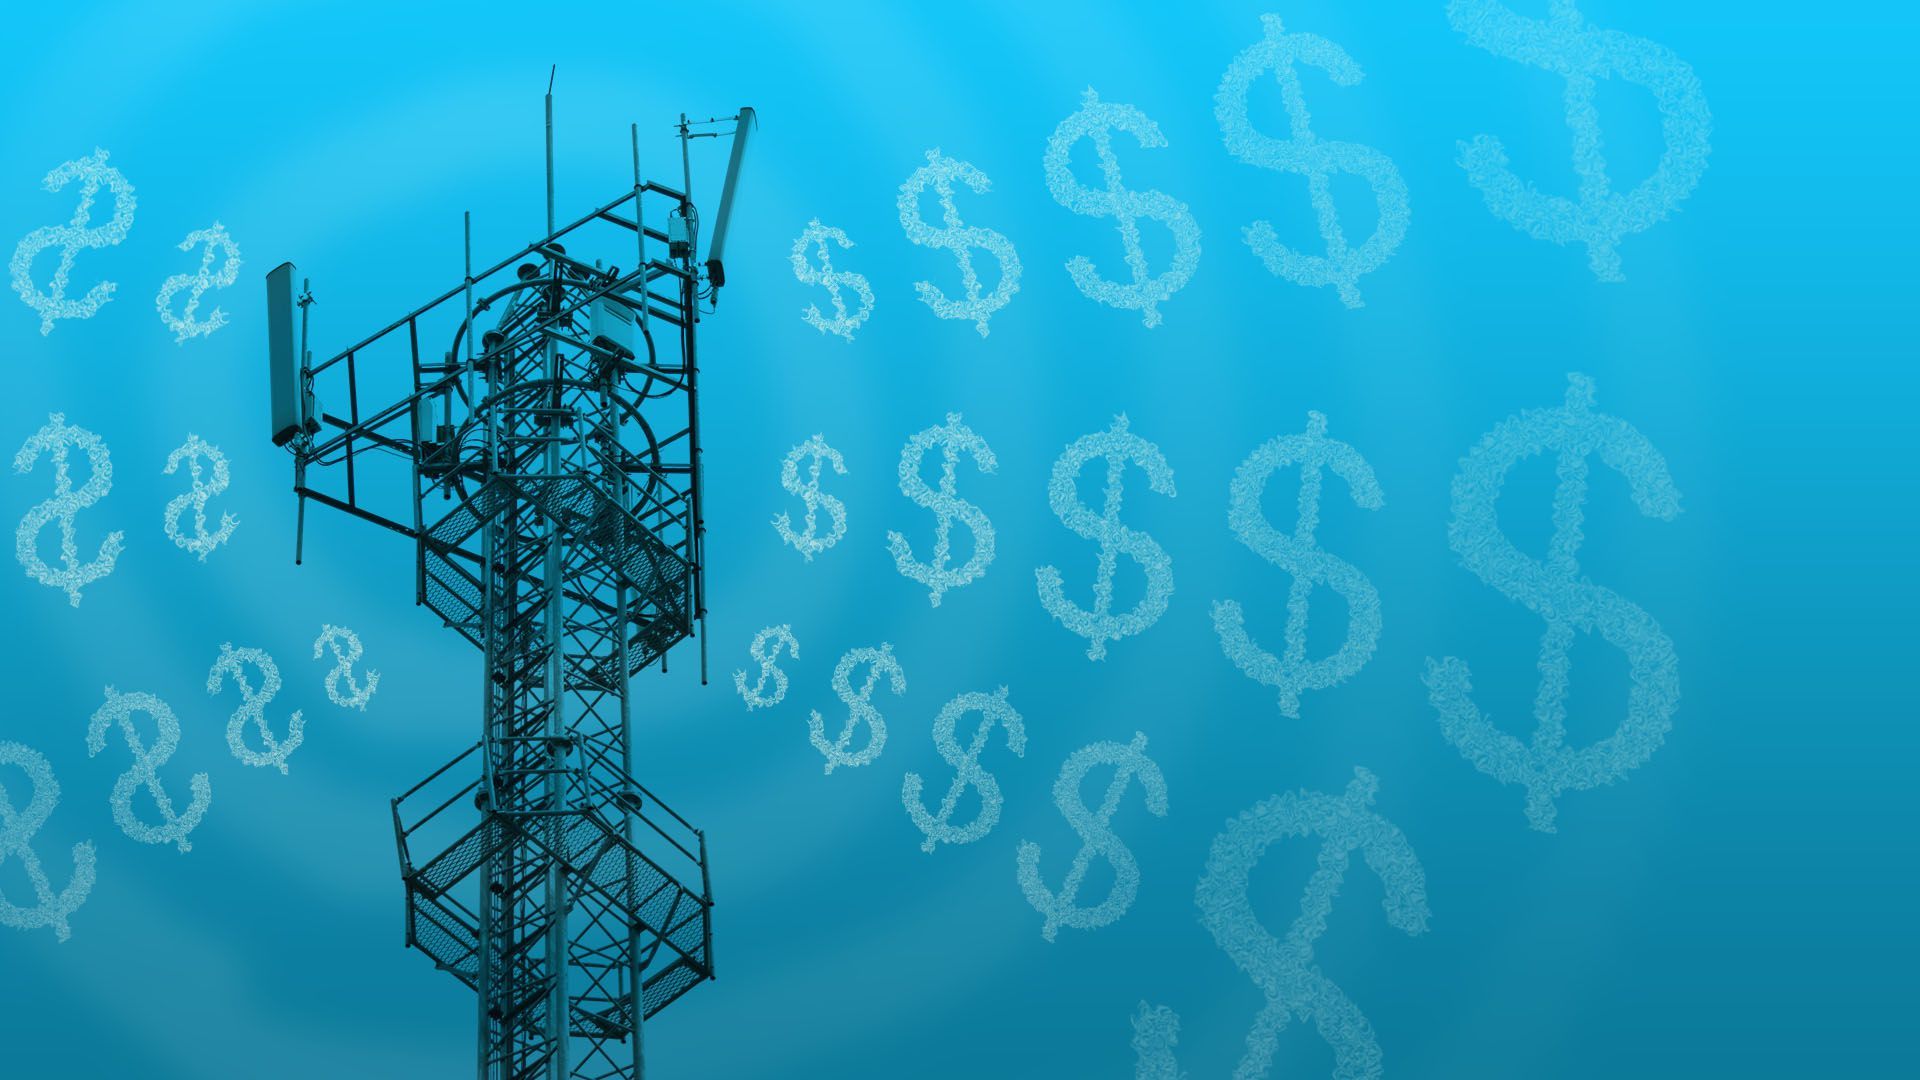 Illustration of a cell phone tower sending out dollar sign signals